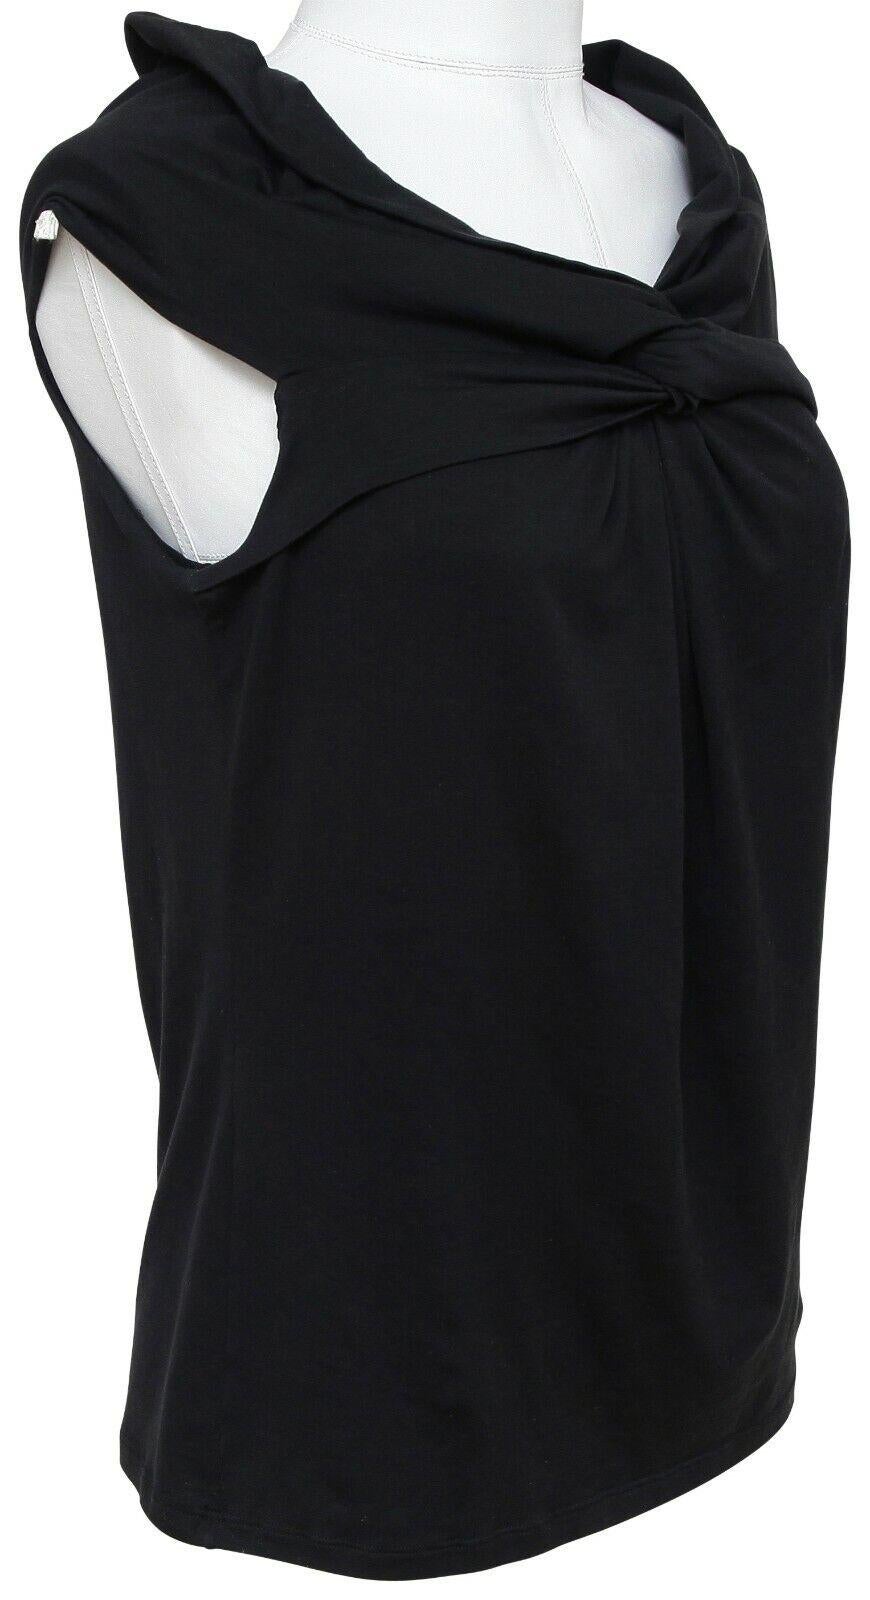 GUARANTEED AUTHENTIC MAX MARA BLACK COTTON STRETCH PULLOVER TOP


Design:
• Black stretch cotton pullover top.
• Cap/sleeveless.
• Draping at neckline.
• Attached netting type sport bra.
• Very comfortable.
   
Size: M

Material: 95% Cotton, 5%